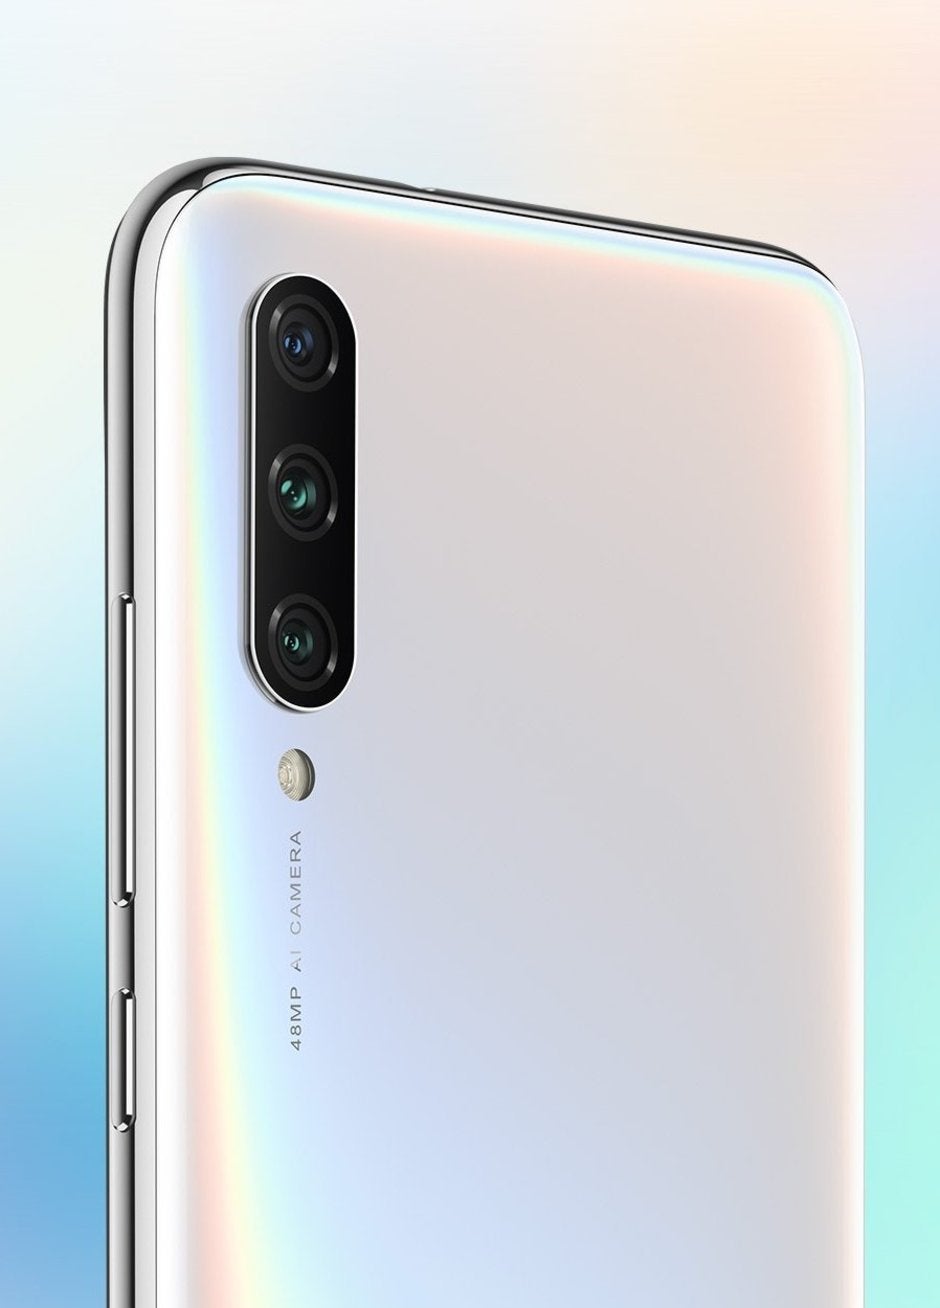 The Xiaomi Mi A3 is official: Android One, 48MP camera, better processor